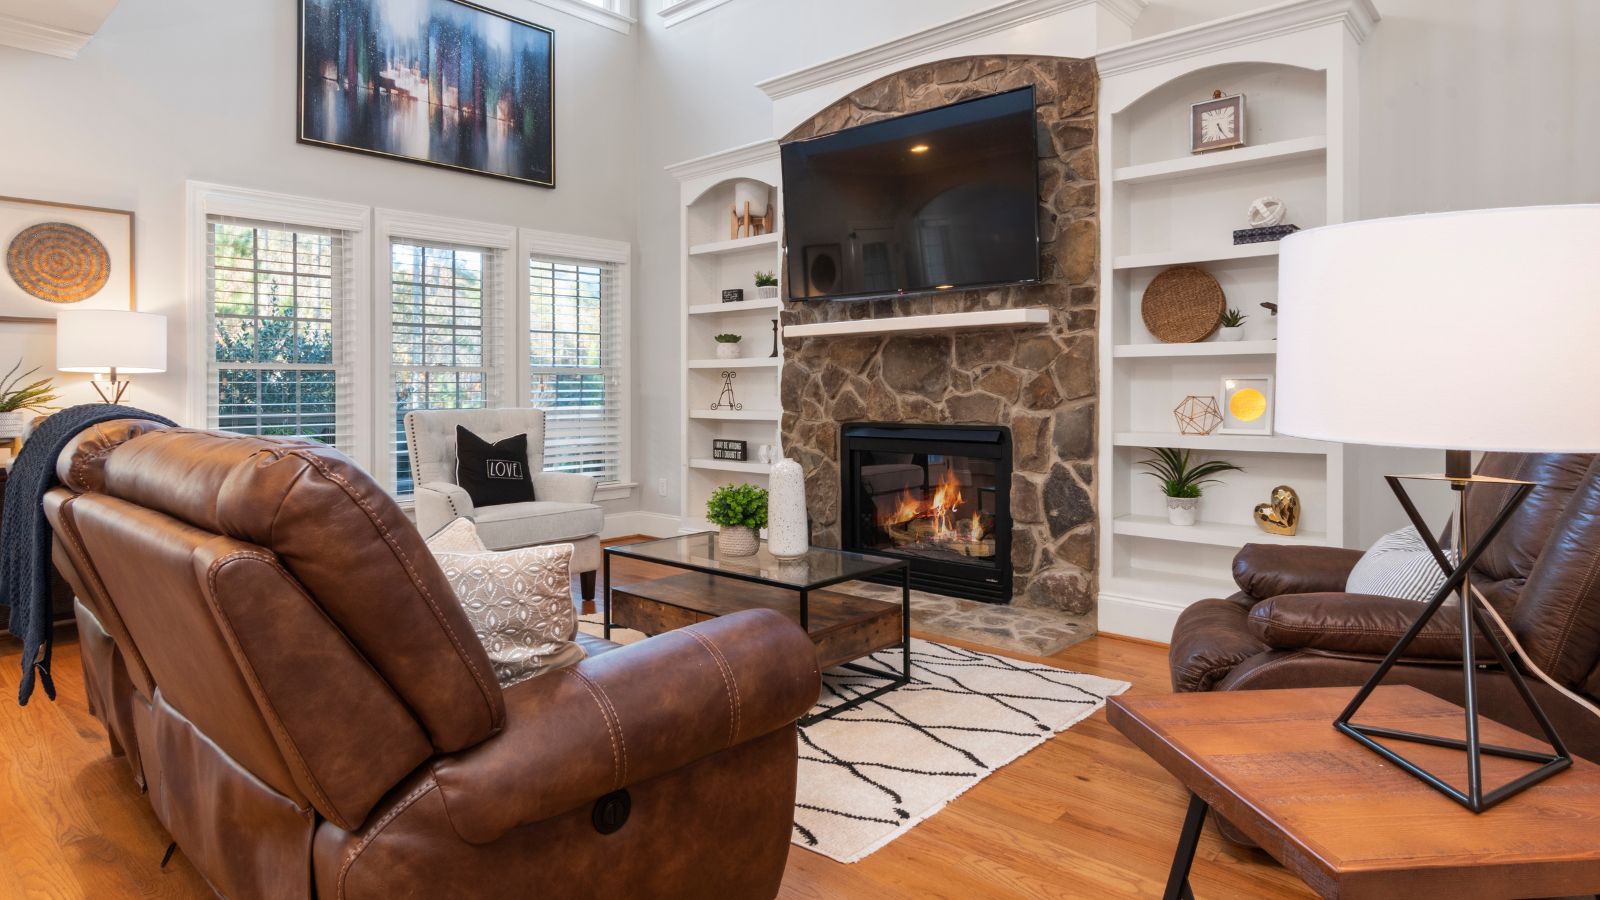 How much does it cost to shiplap a fireplace?